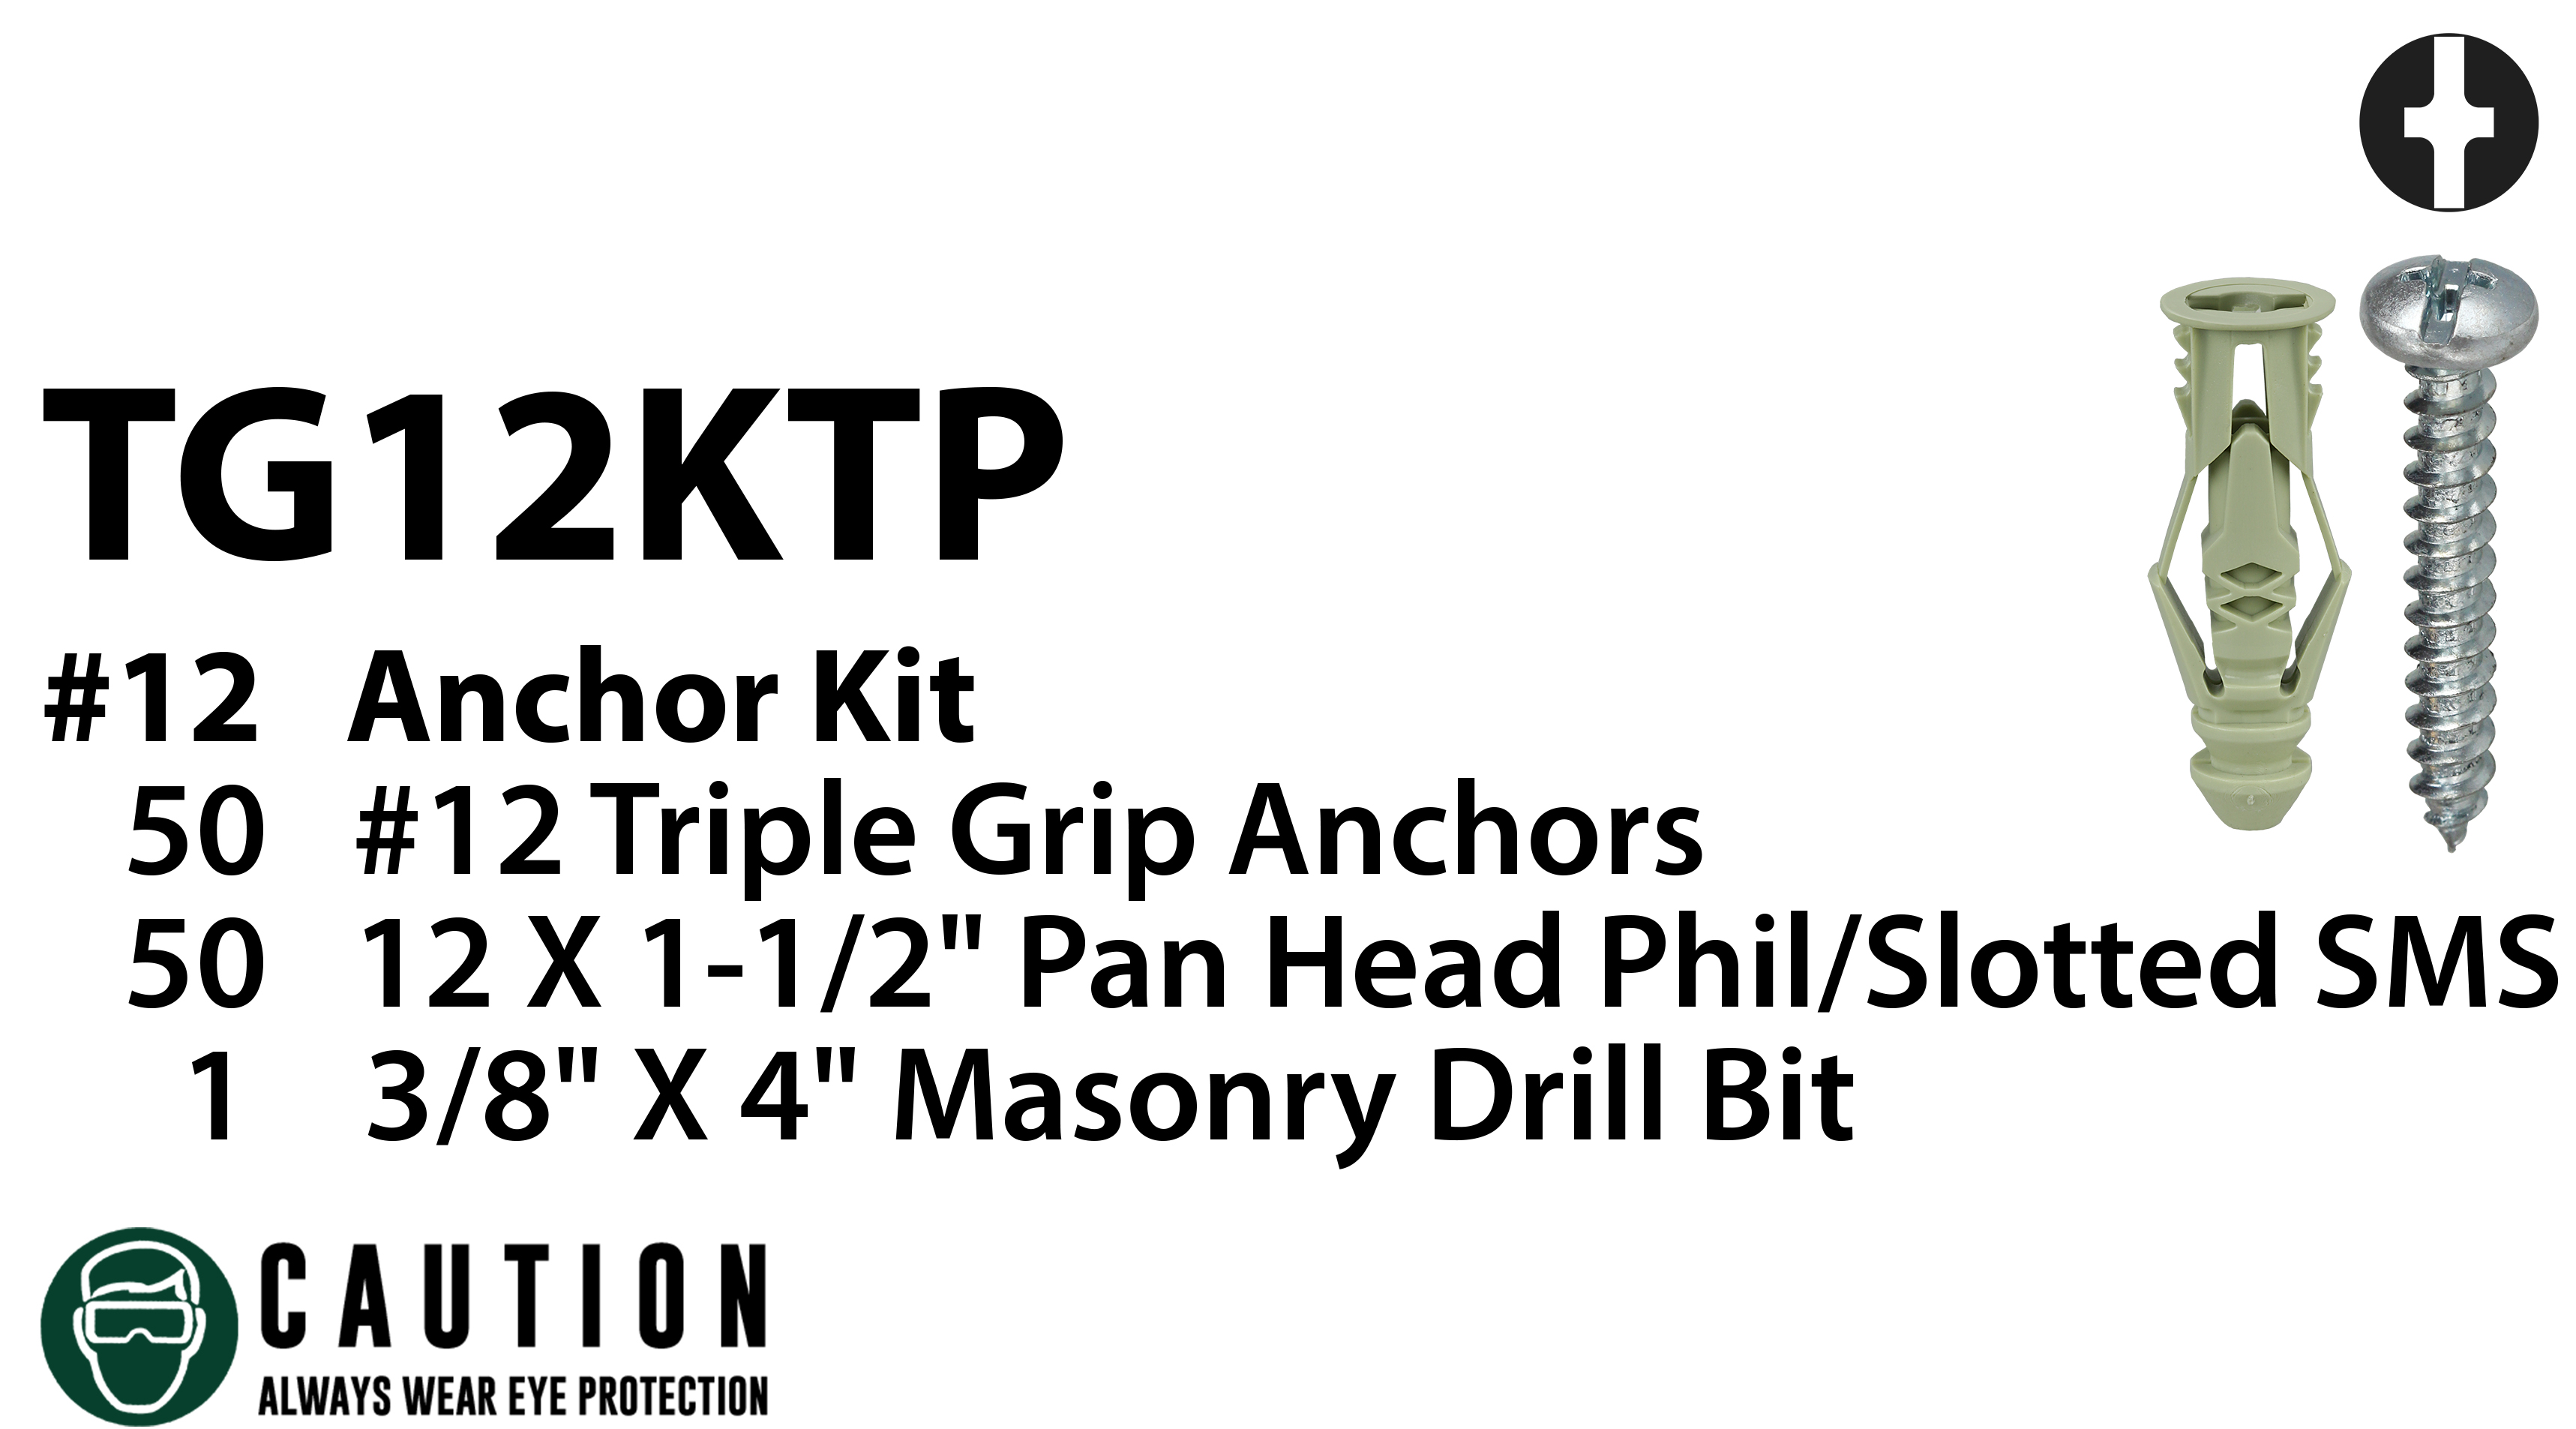 Anchor Kit, #12 x 1-1/4 IN Size, includes #12 Green Triple Grip Anchor and #12 Square Drive Anchor Kit